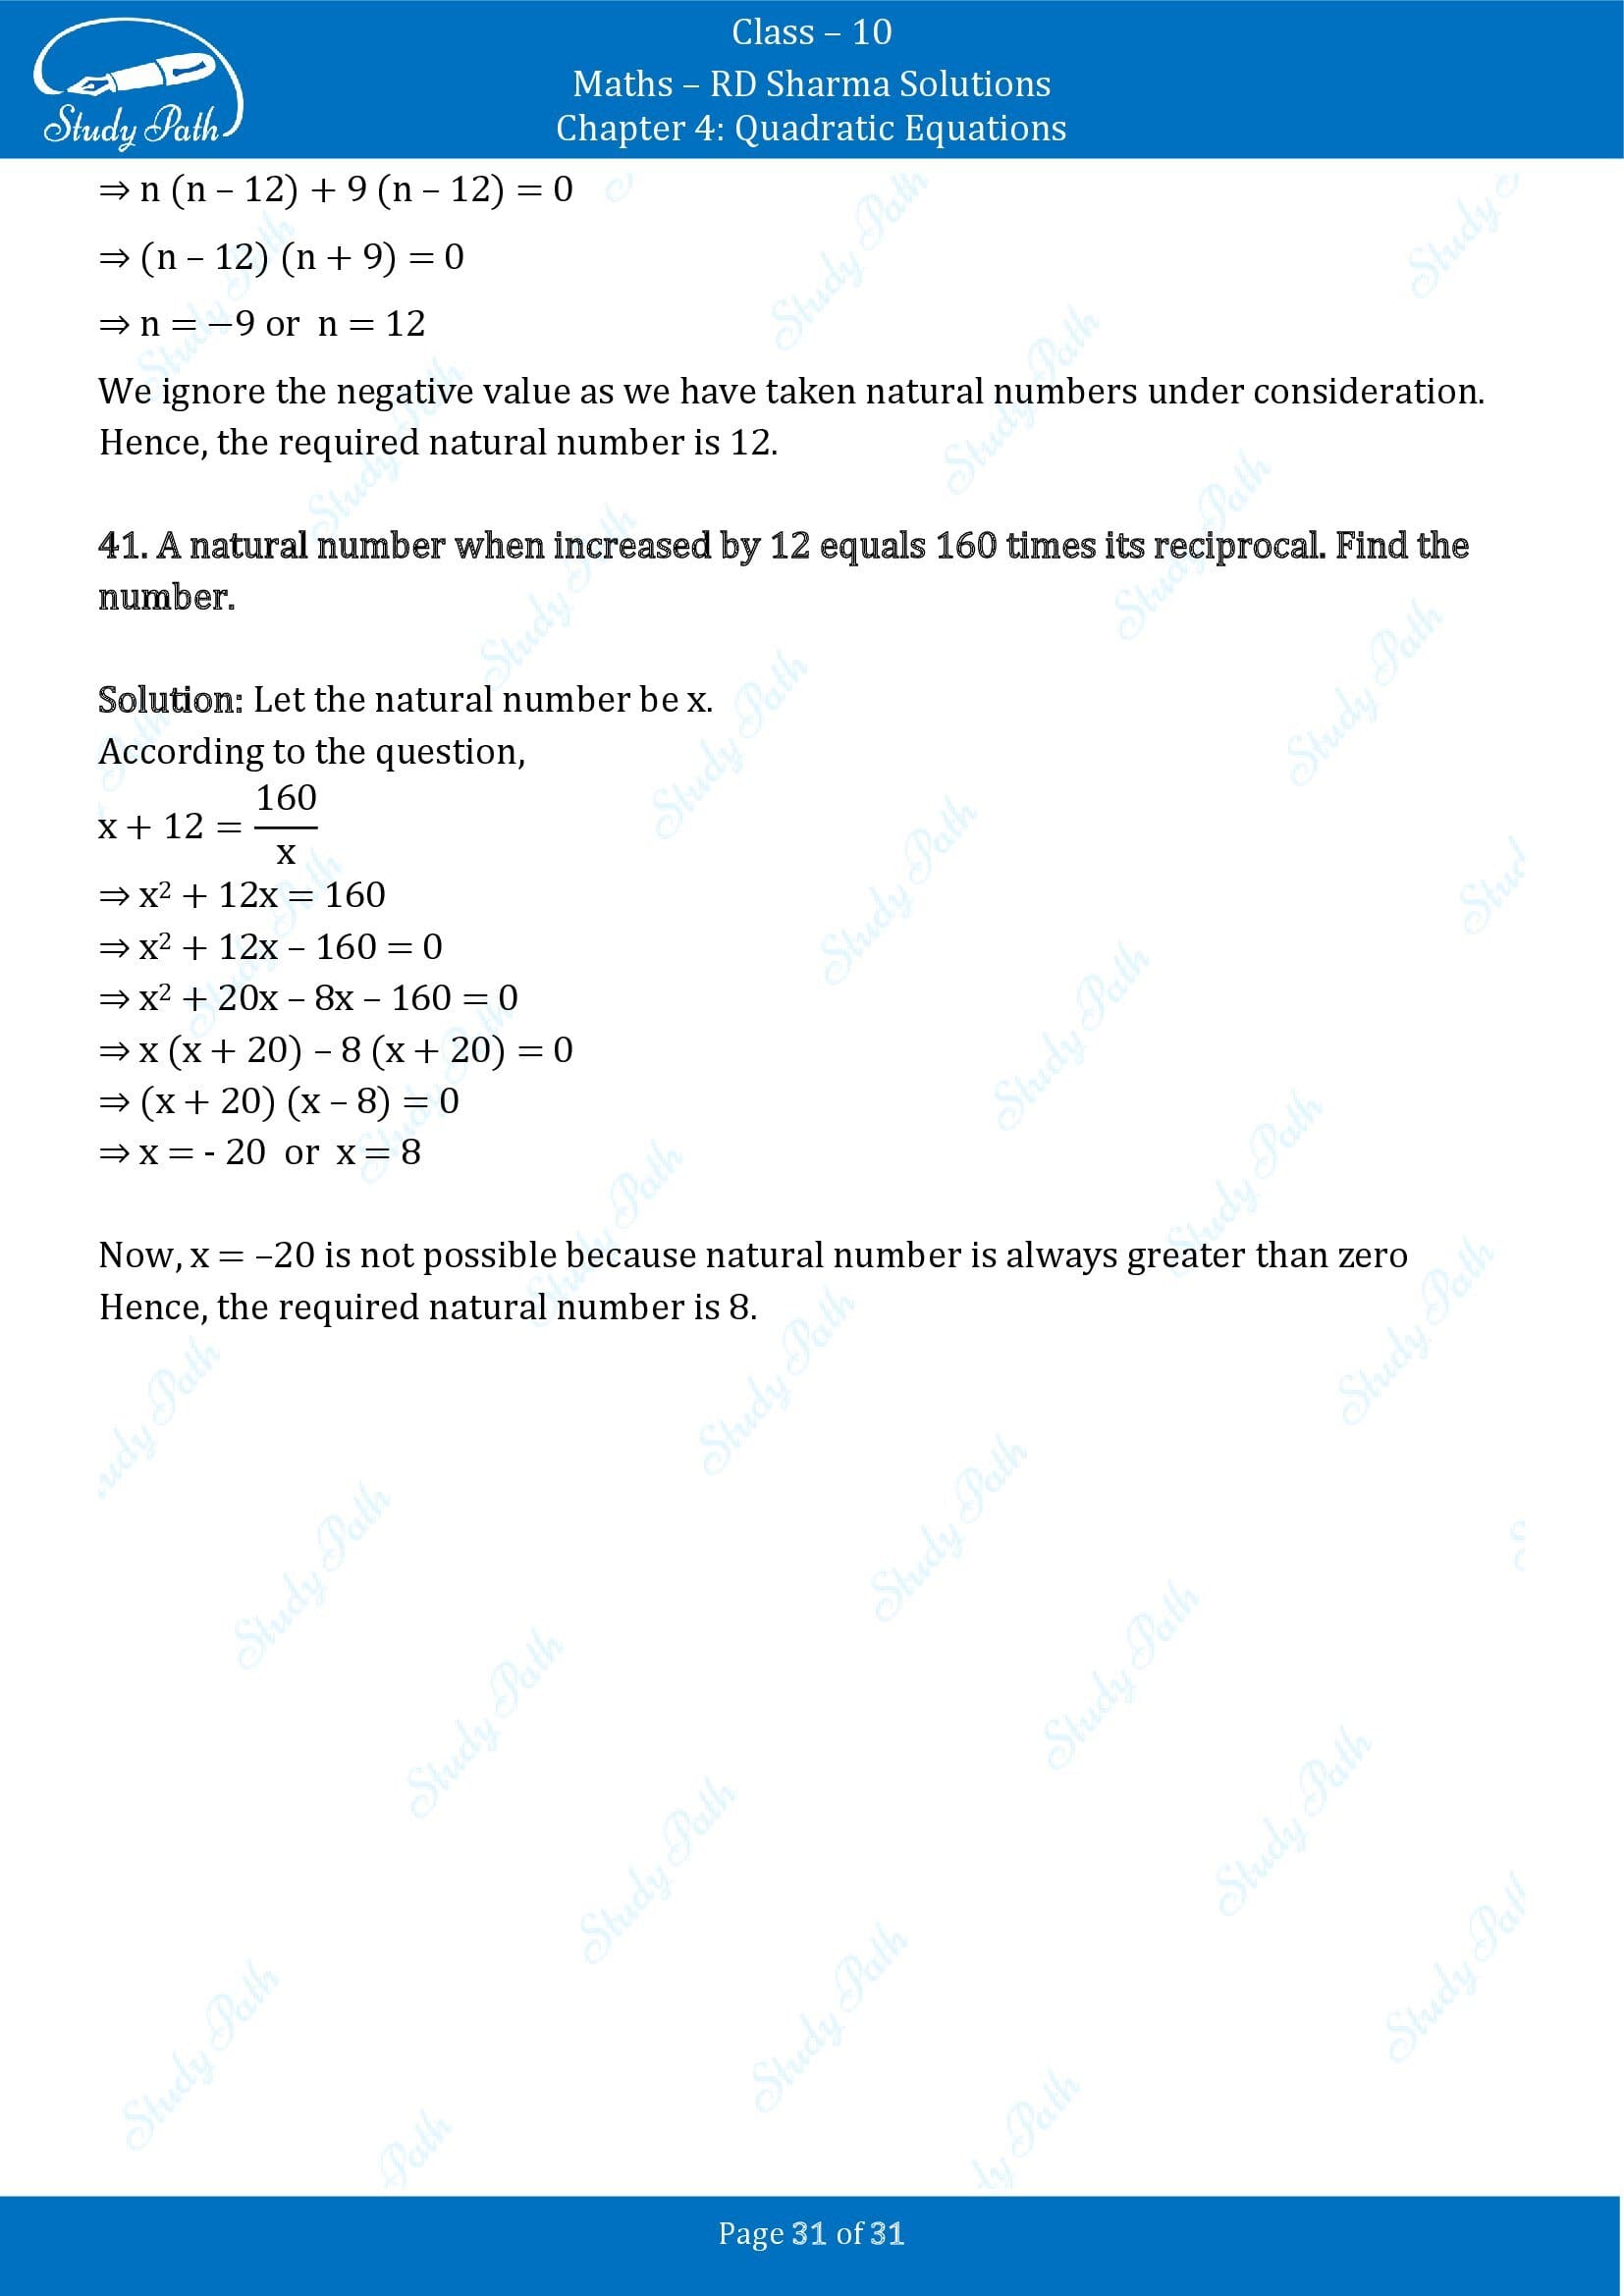 RD Sharma Solutions Class 10 Chapter 4 Quadratic Equations Exercise 4.7 00031